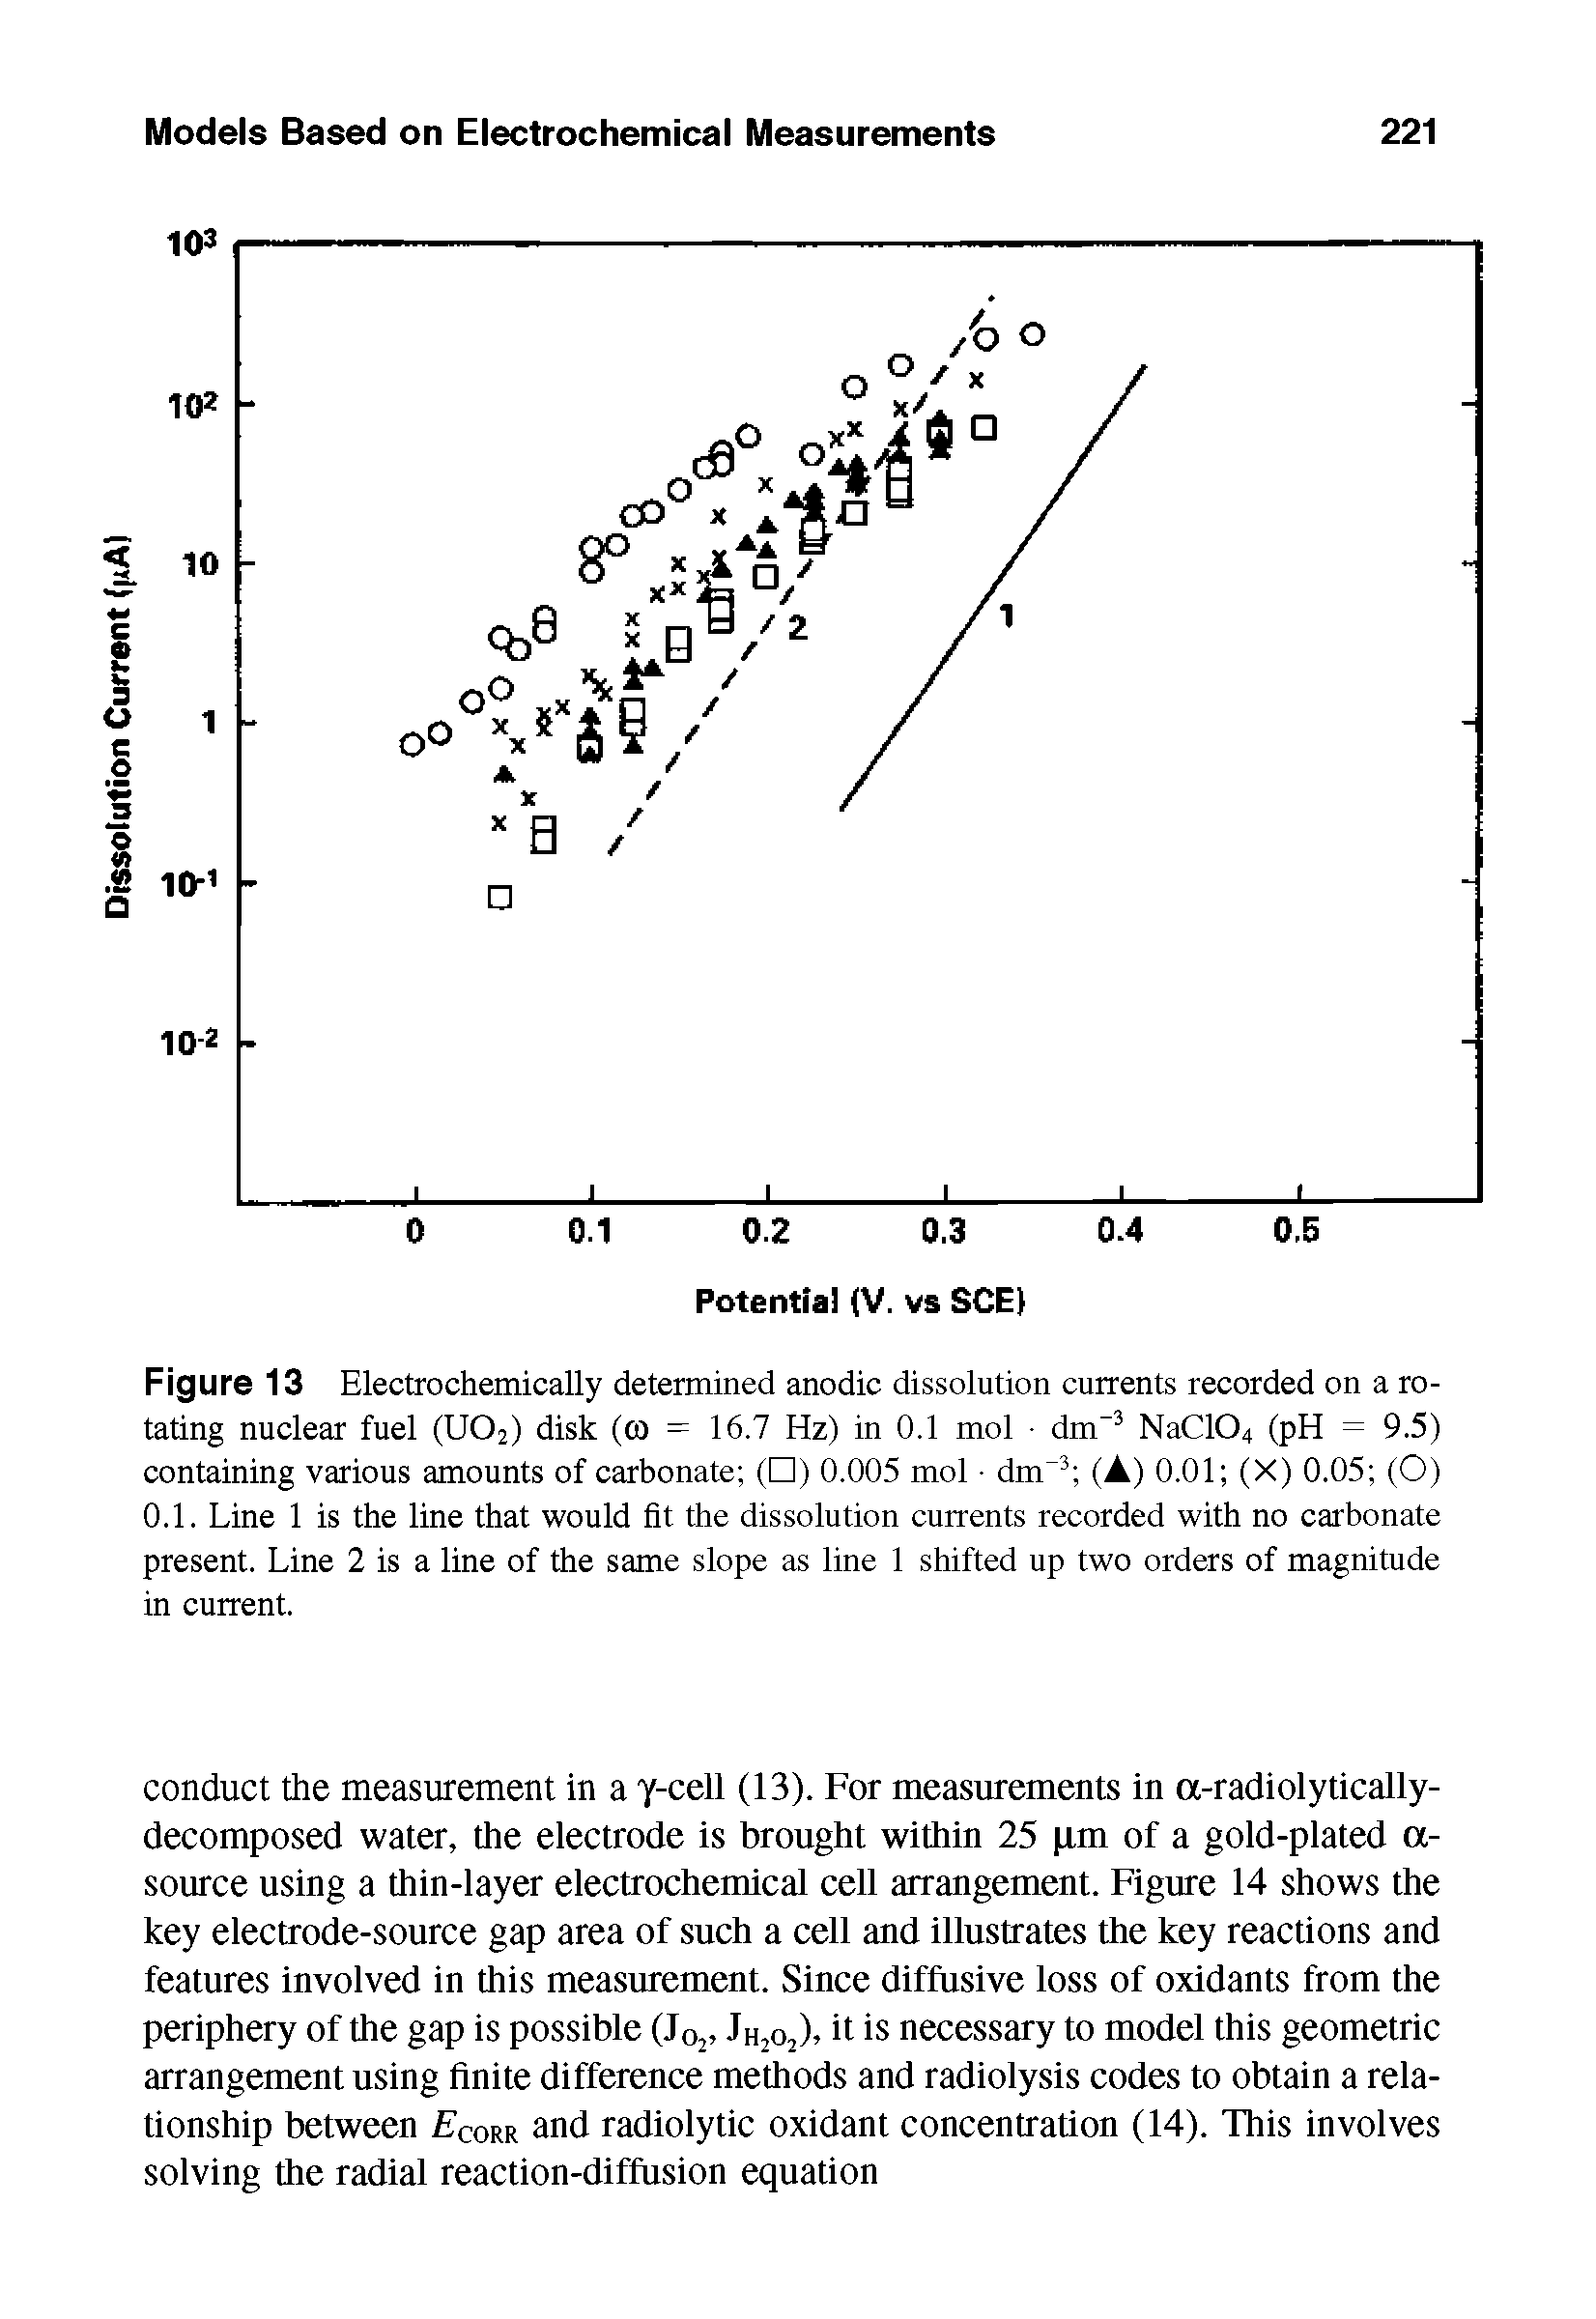 Figure 13 Electrochemically determined anodic dissolution currents recorded on a rotating nuclear fuel (U02) disk (co = 16.7 Hz) in 0.1 mol dm-3 NaC104 (pH = 9.5) containing various amounts of carbonate ( ) 0.005 mol dm-3 (A) 0.01 (X) 0.05 (O) 0.1. Line 1 is the line that would fit the dissolution currents recorded with no carbonate present. Line 2 is a line of the same slope as line 1 shifted up two orders of magnitude in current.